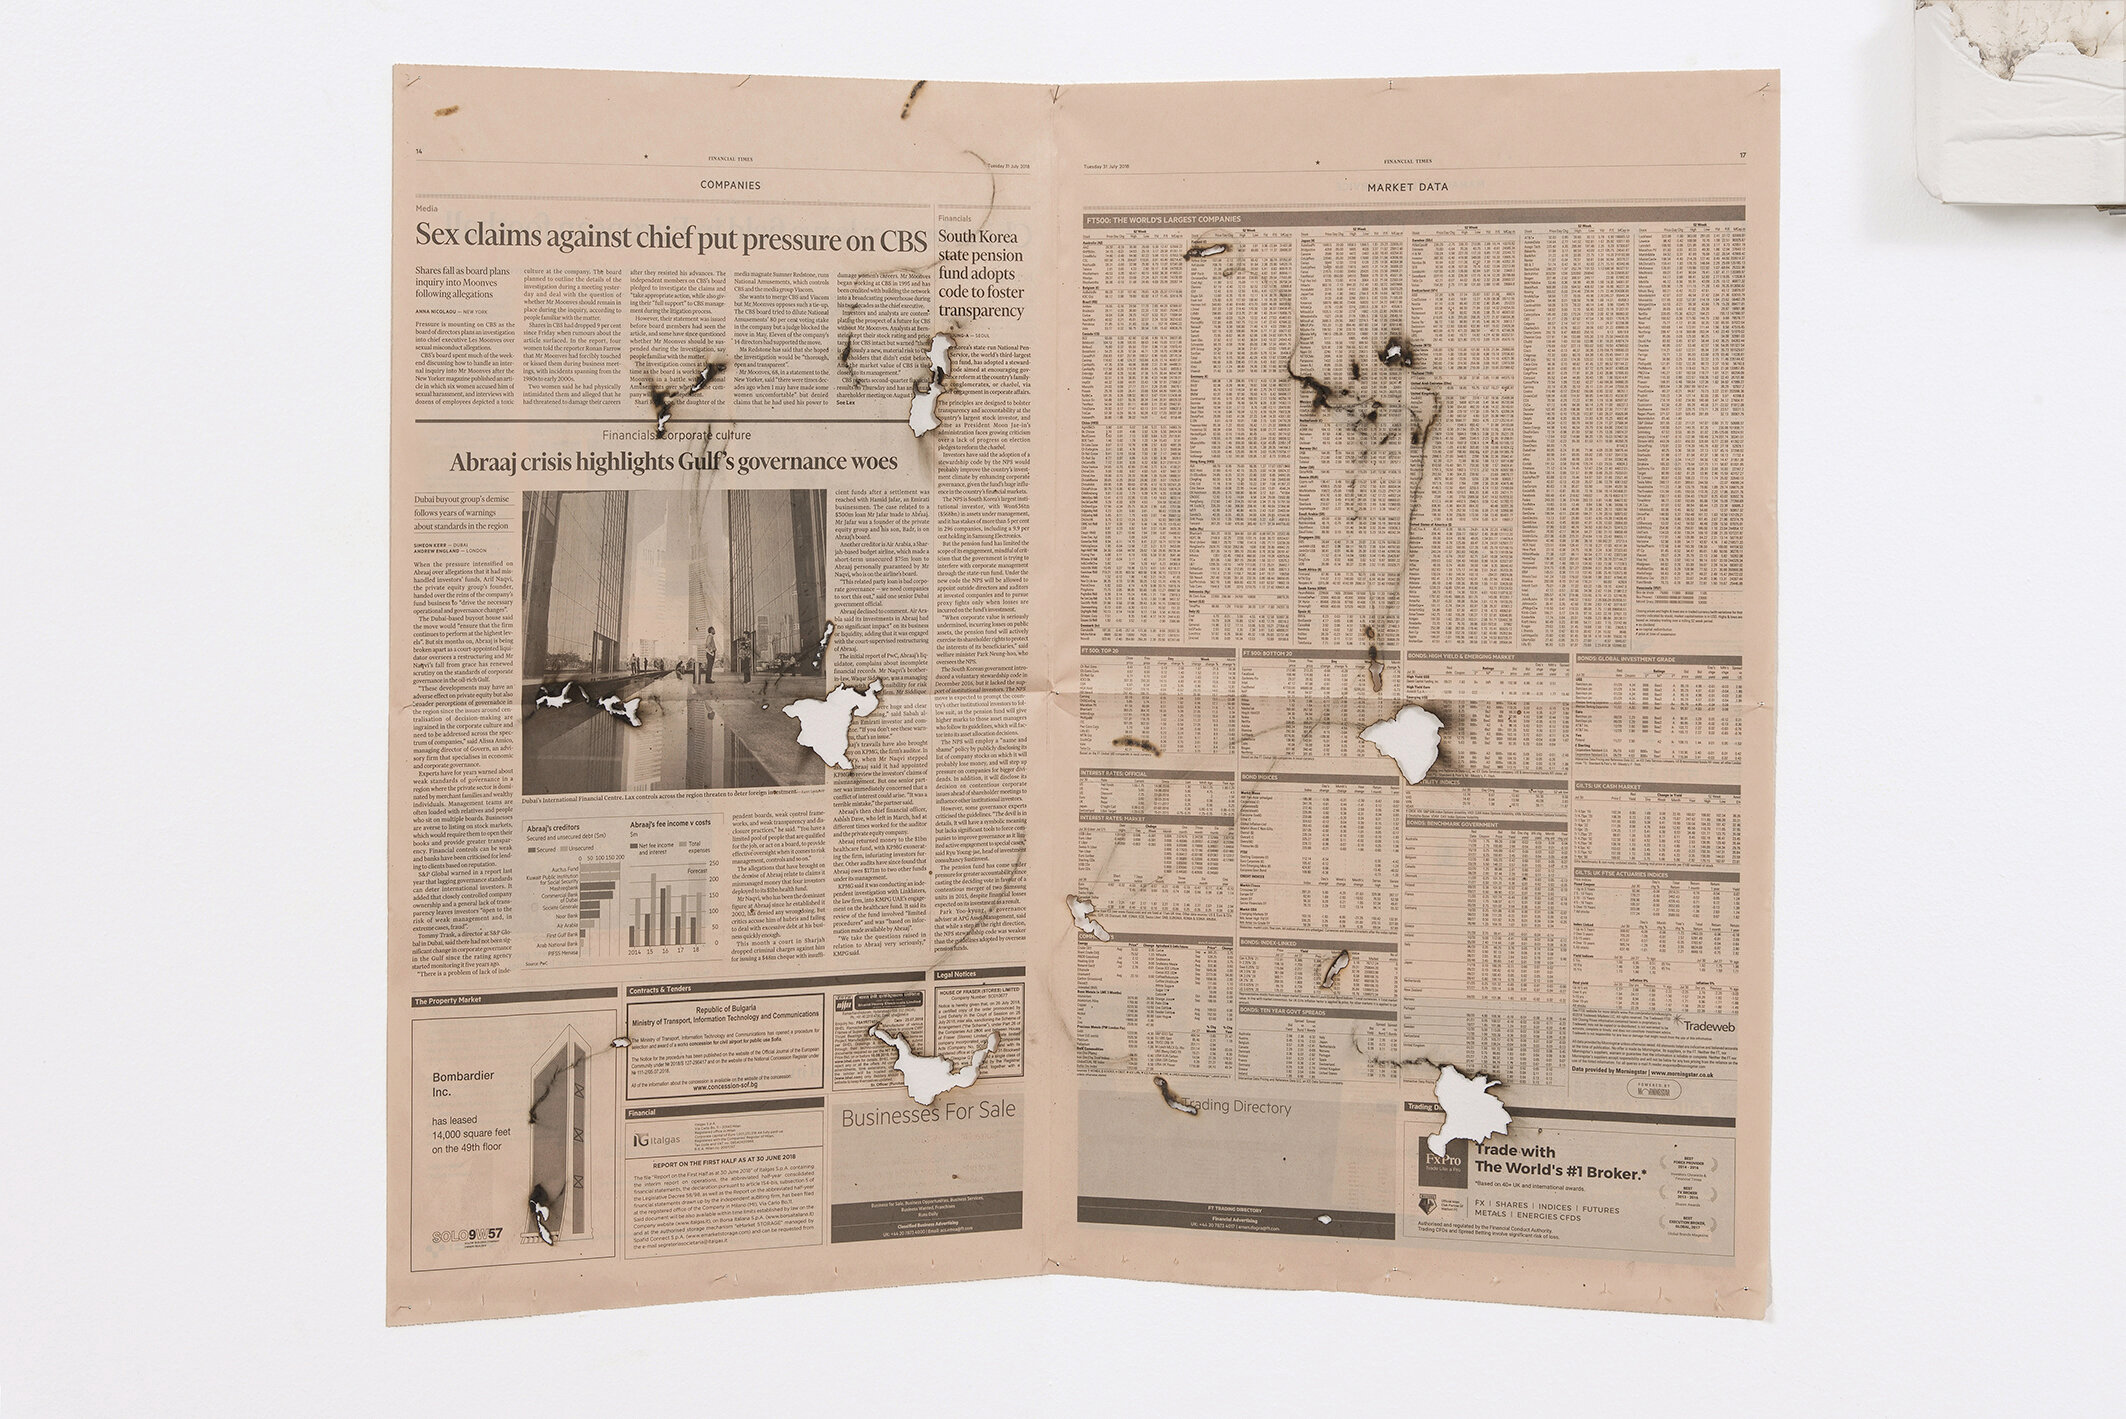   Daily Sketches, Financial Times #6 , newspaper, nails, 60cm x 50cm, 68projects, Berlin, Germany, 2018 